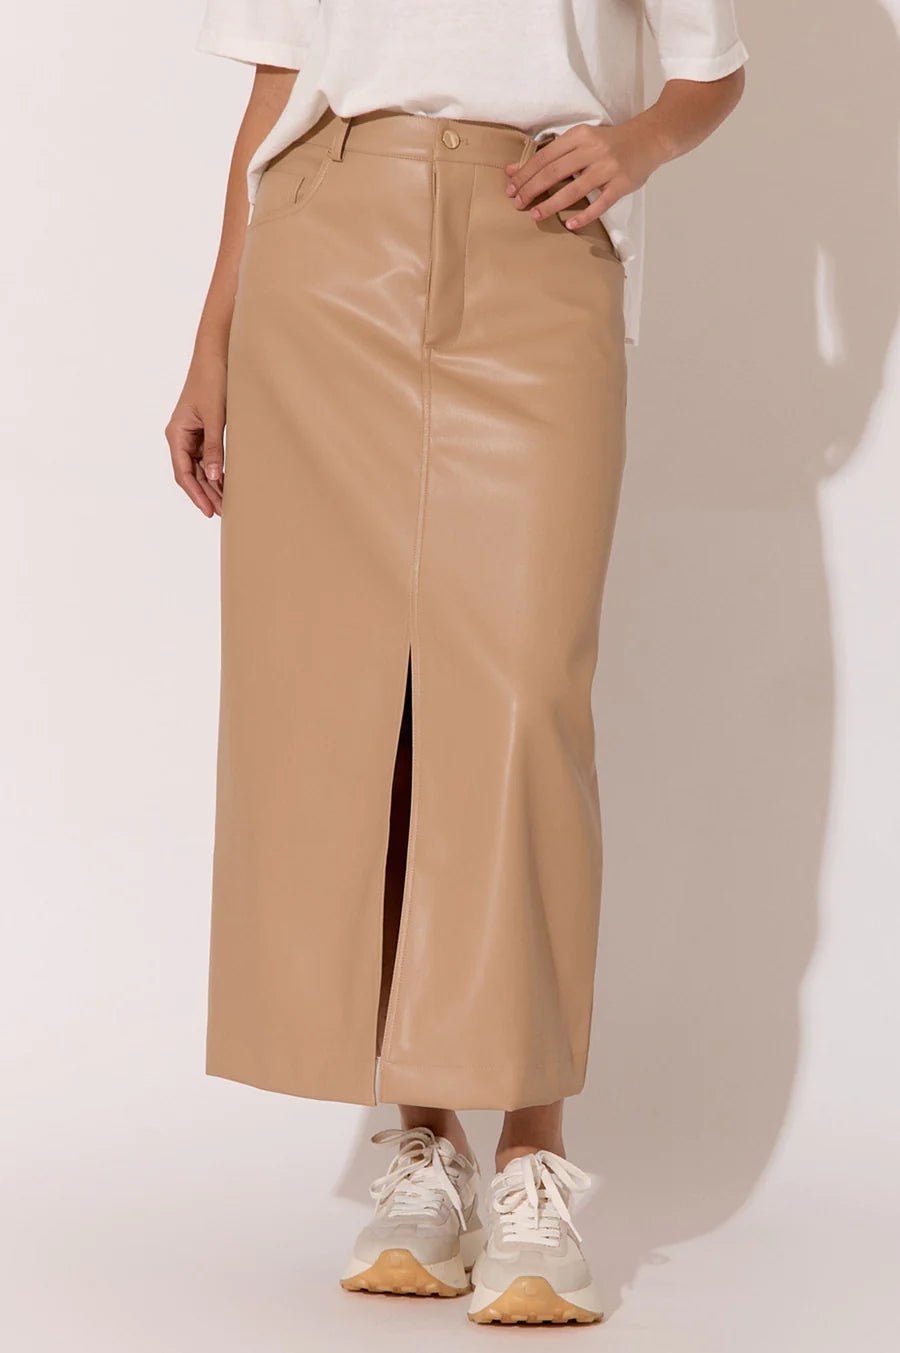 Asher Faux Leather Skirt (Camel) - Something For Me​​